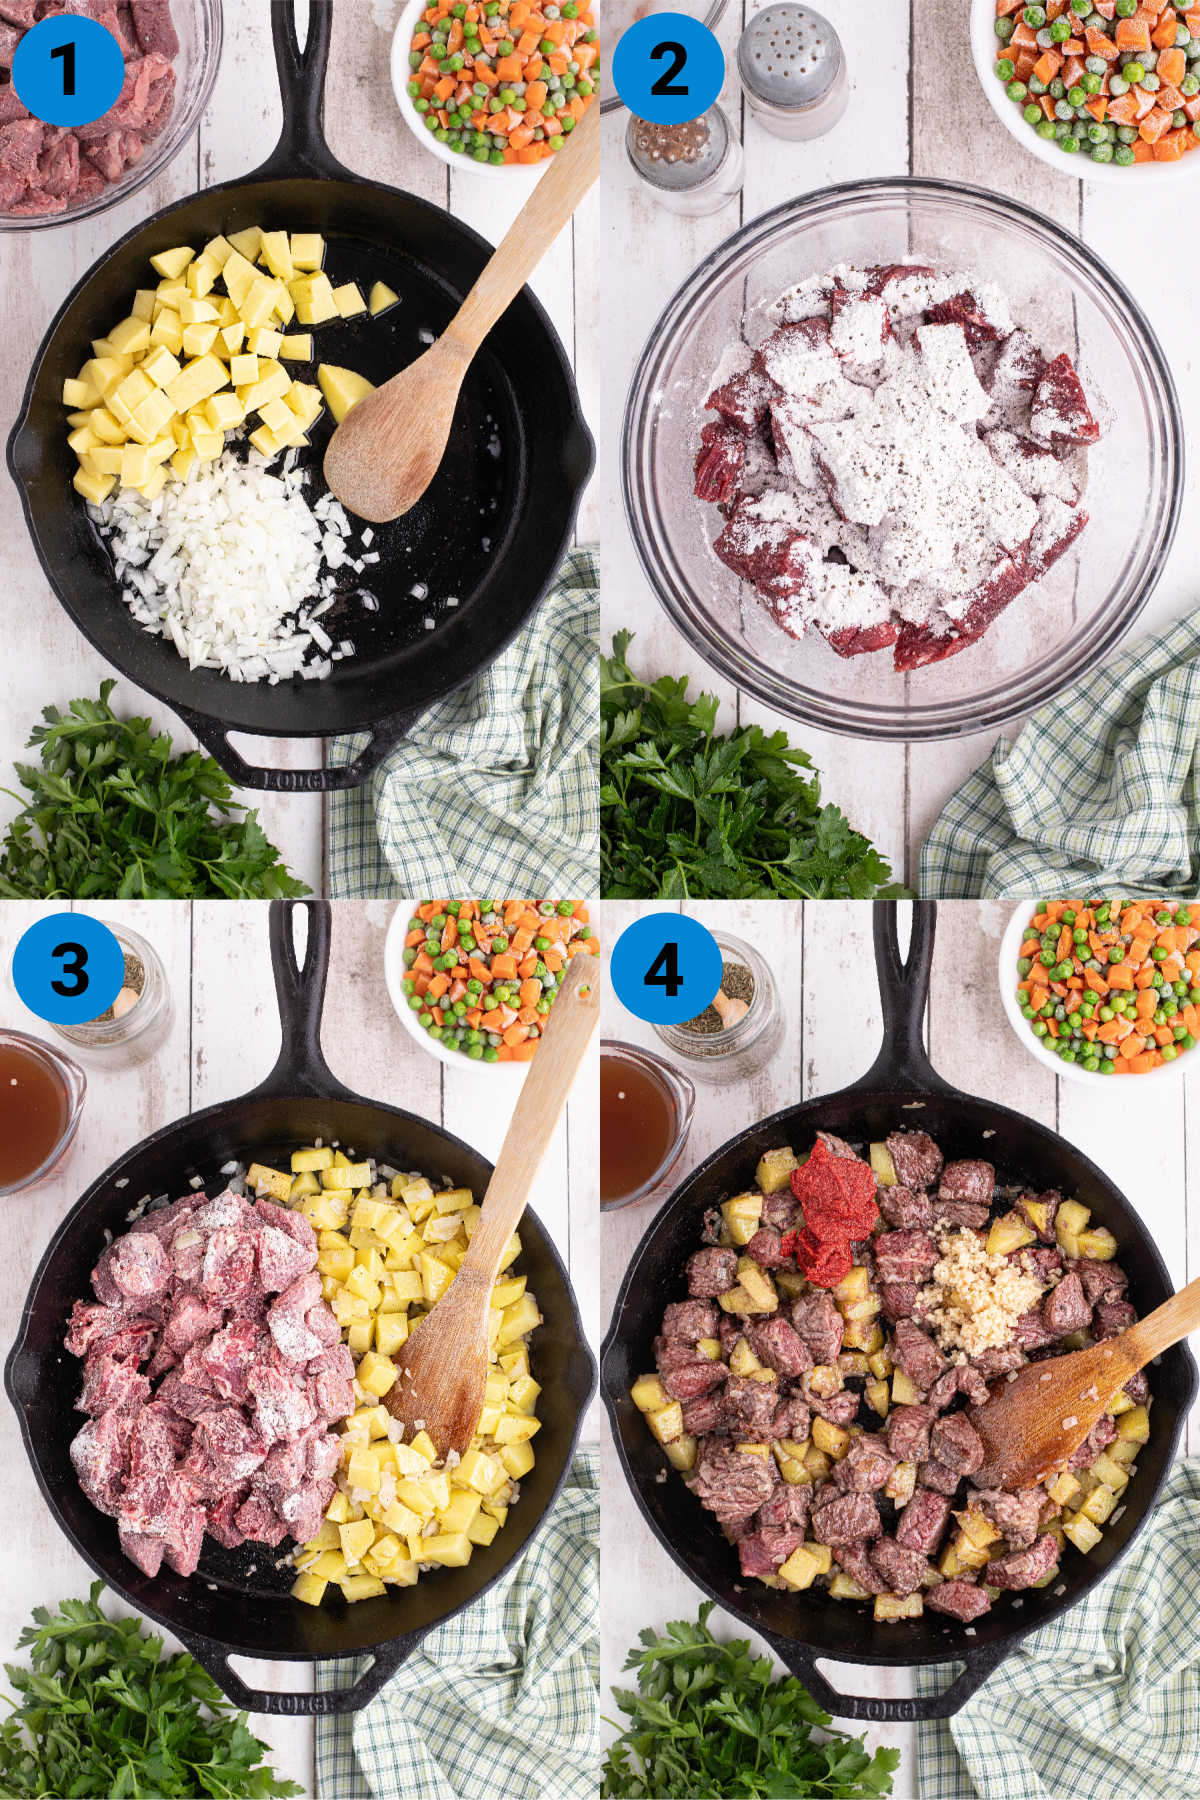 A collage of four images showing how to make a beef pot pie, recipe steps 1-4.